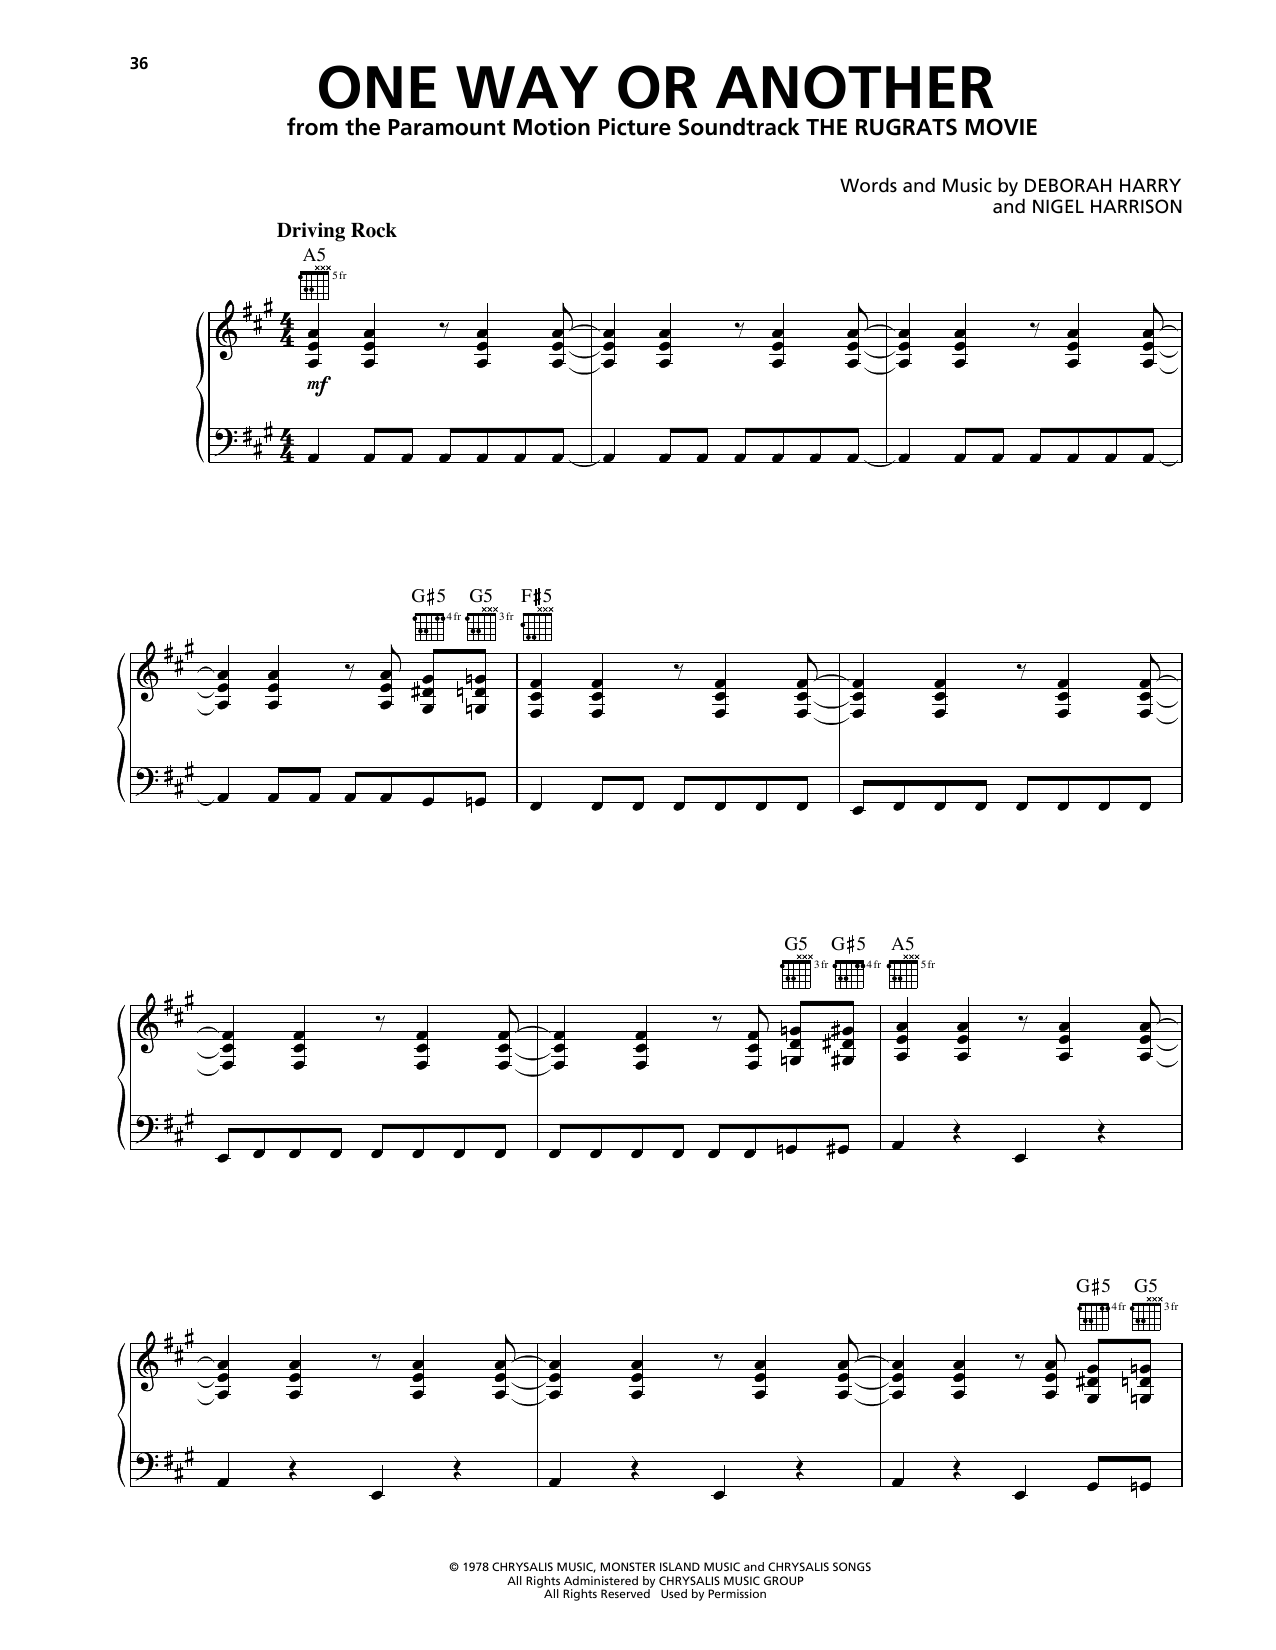 Blondie One Way Or Another sheet music notes printable PDF score